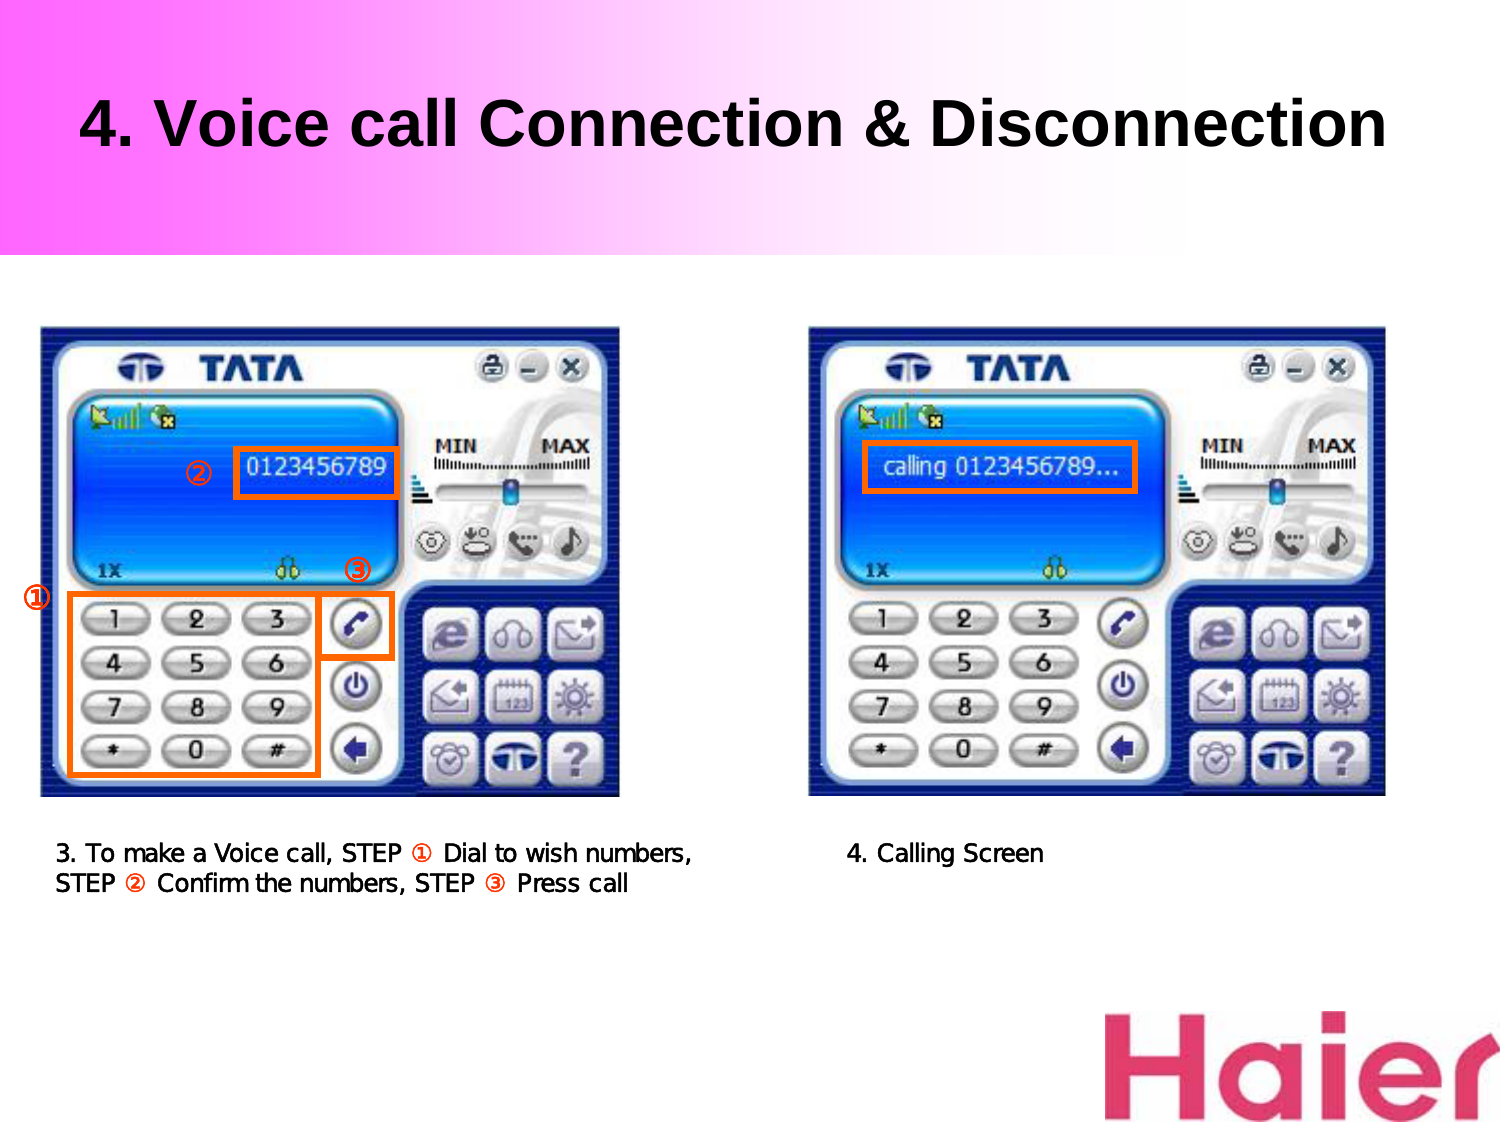 4. Voice call Connection &amp; Disconnection3. To make a Voice call, STEP ①Dial to wish numbers, STEP ②Confirm the numbers, STEP ③Press call 4. Calling Screen②①③①③①③③③